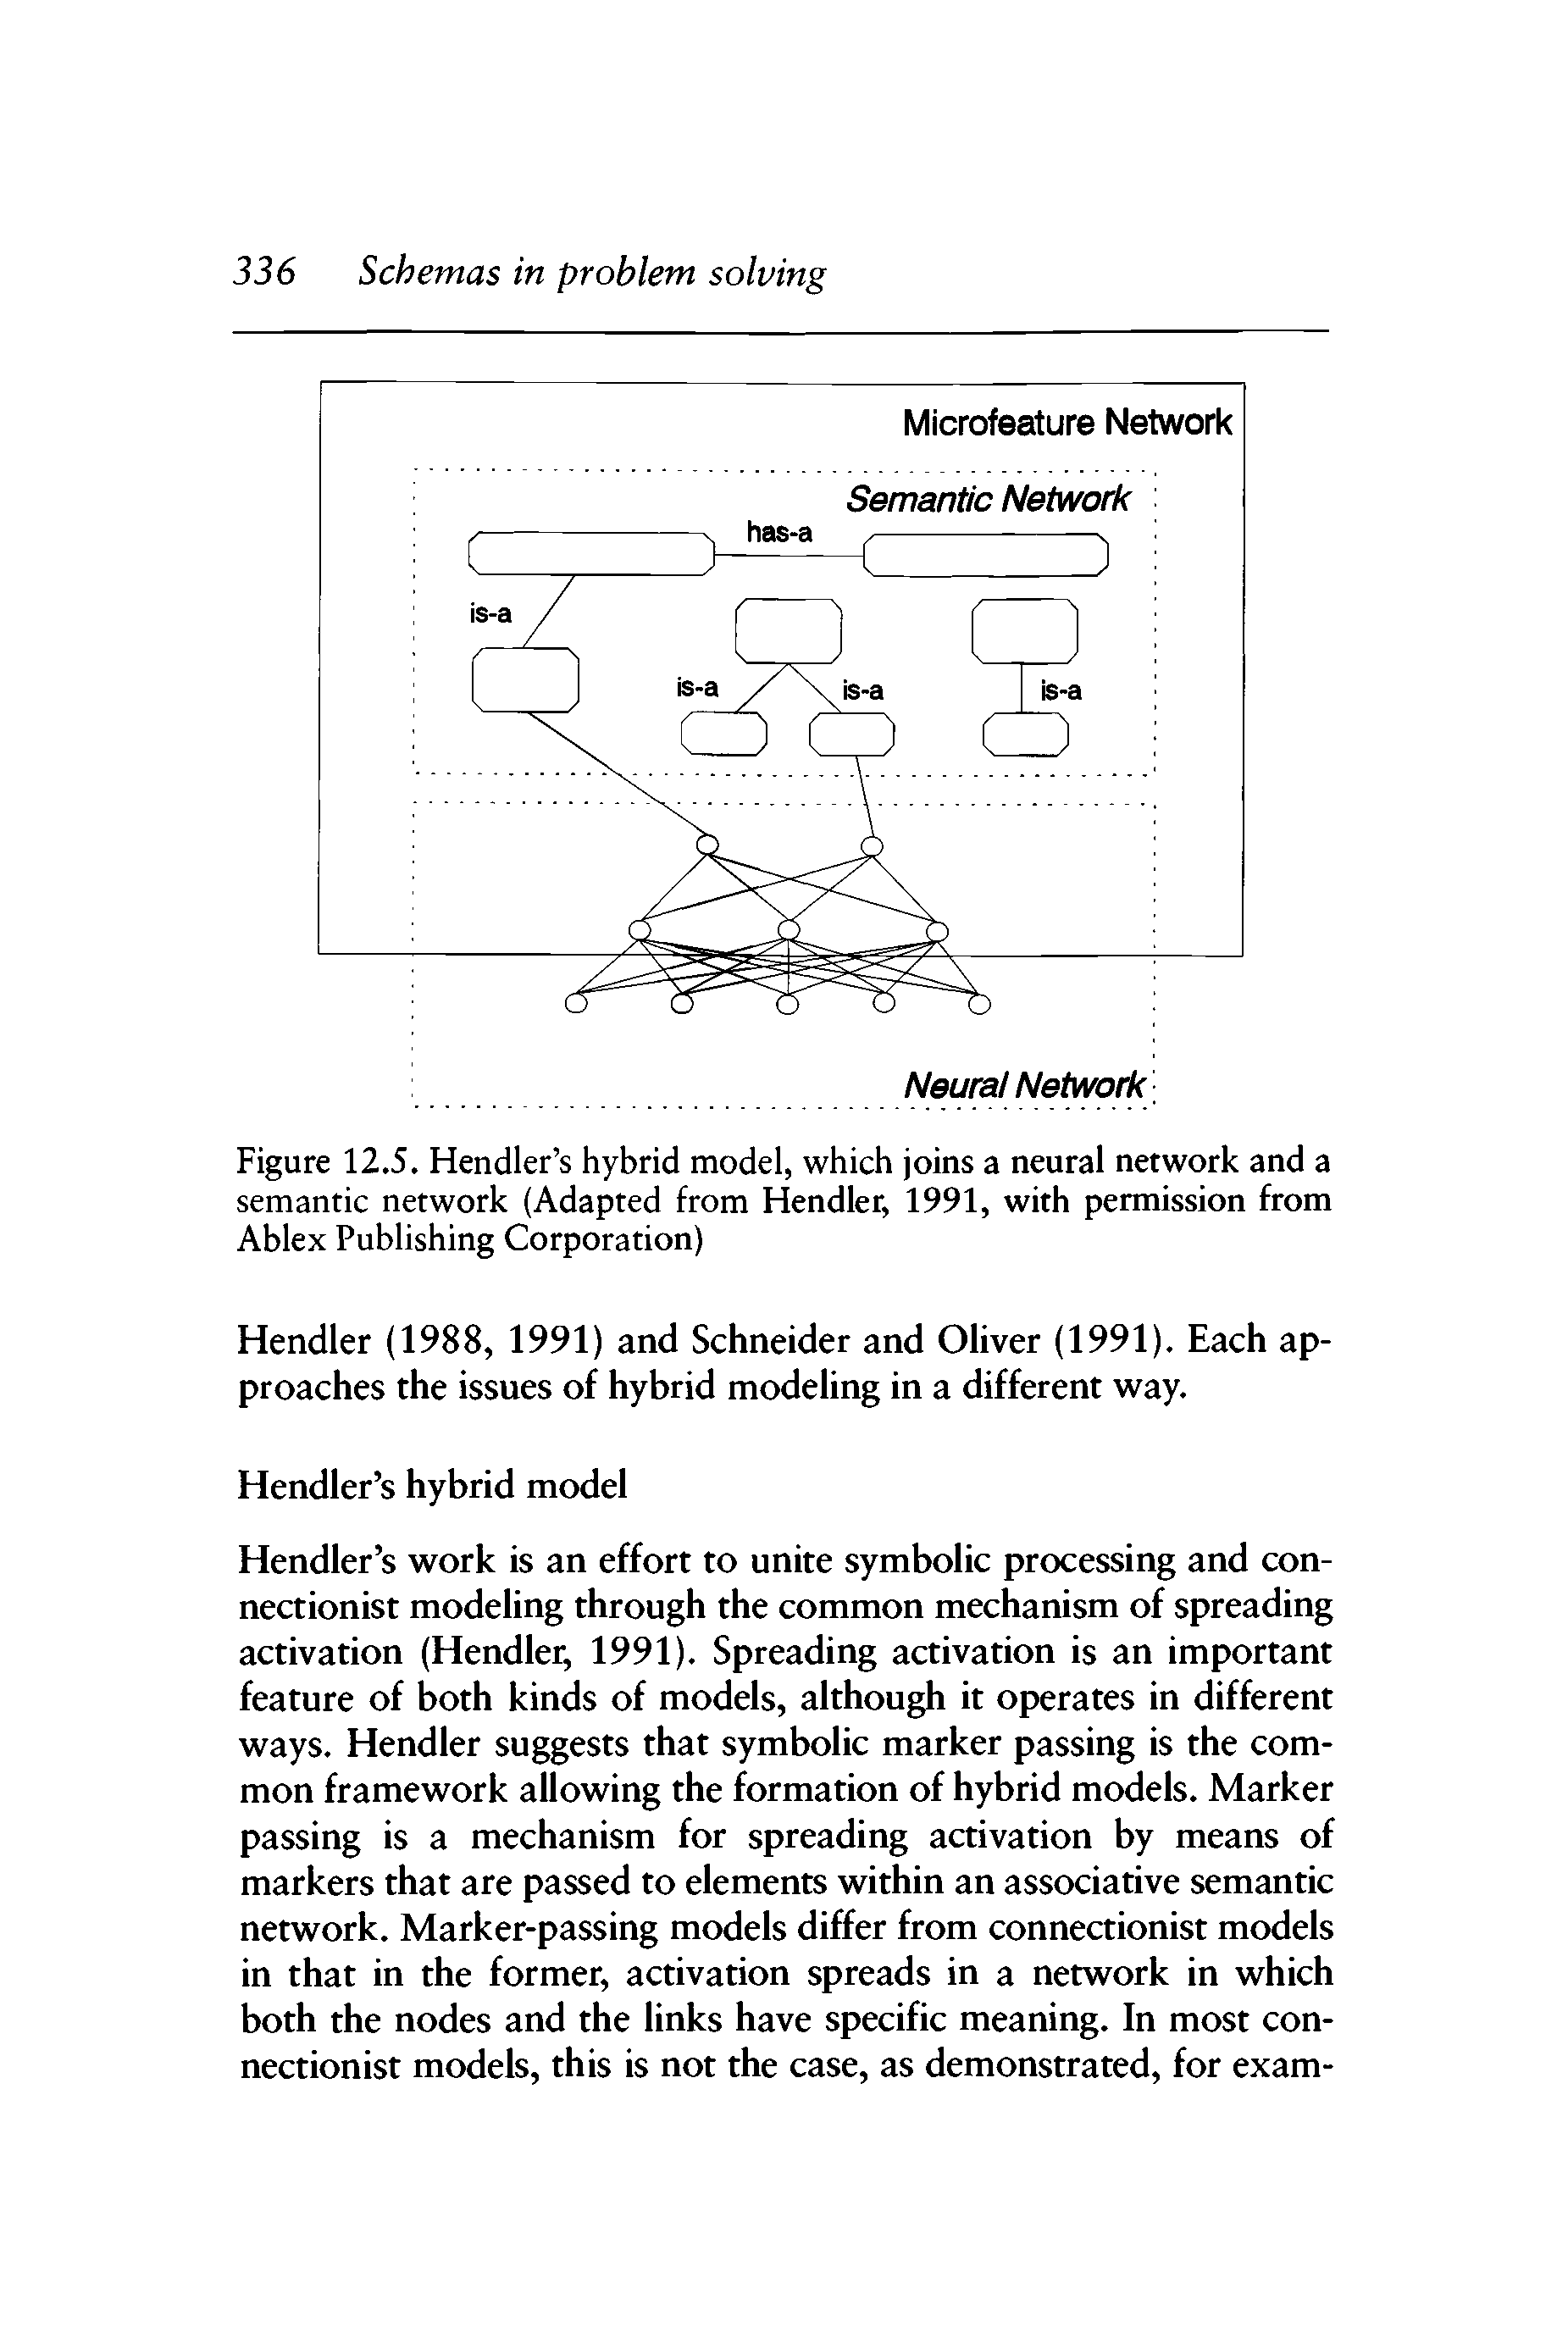 Figure 12.5. Hendler s hybrid model, which joins a neural network and a semantic network (Adapted from Hendler, 1991, with permission from Ablex Publishing Corporation)...